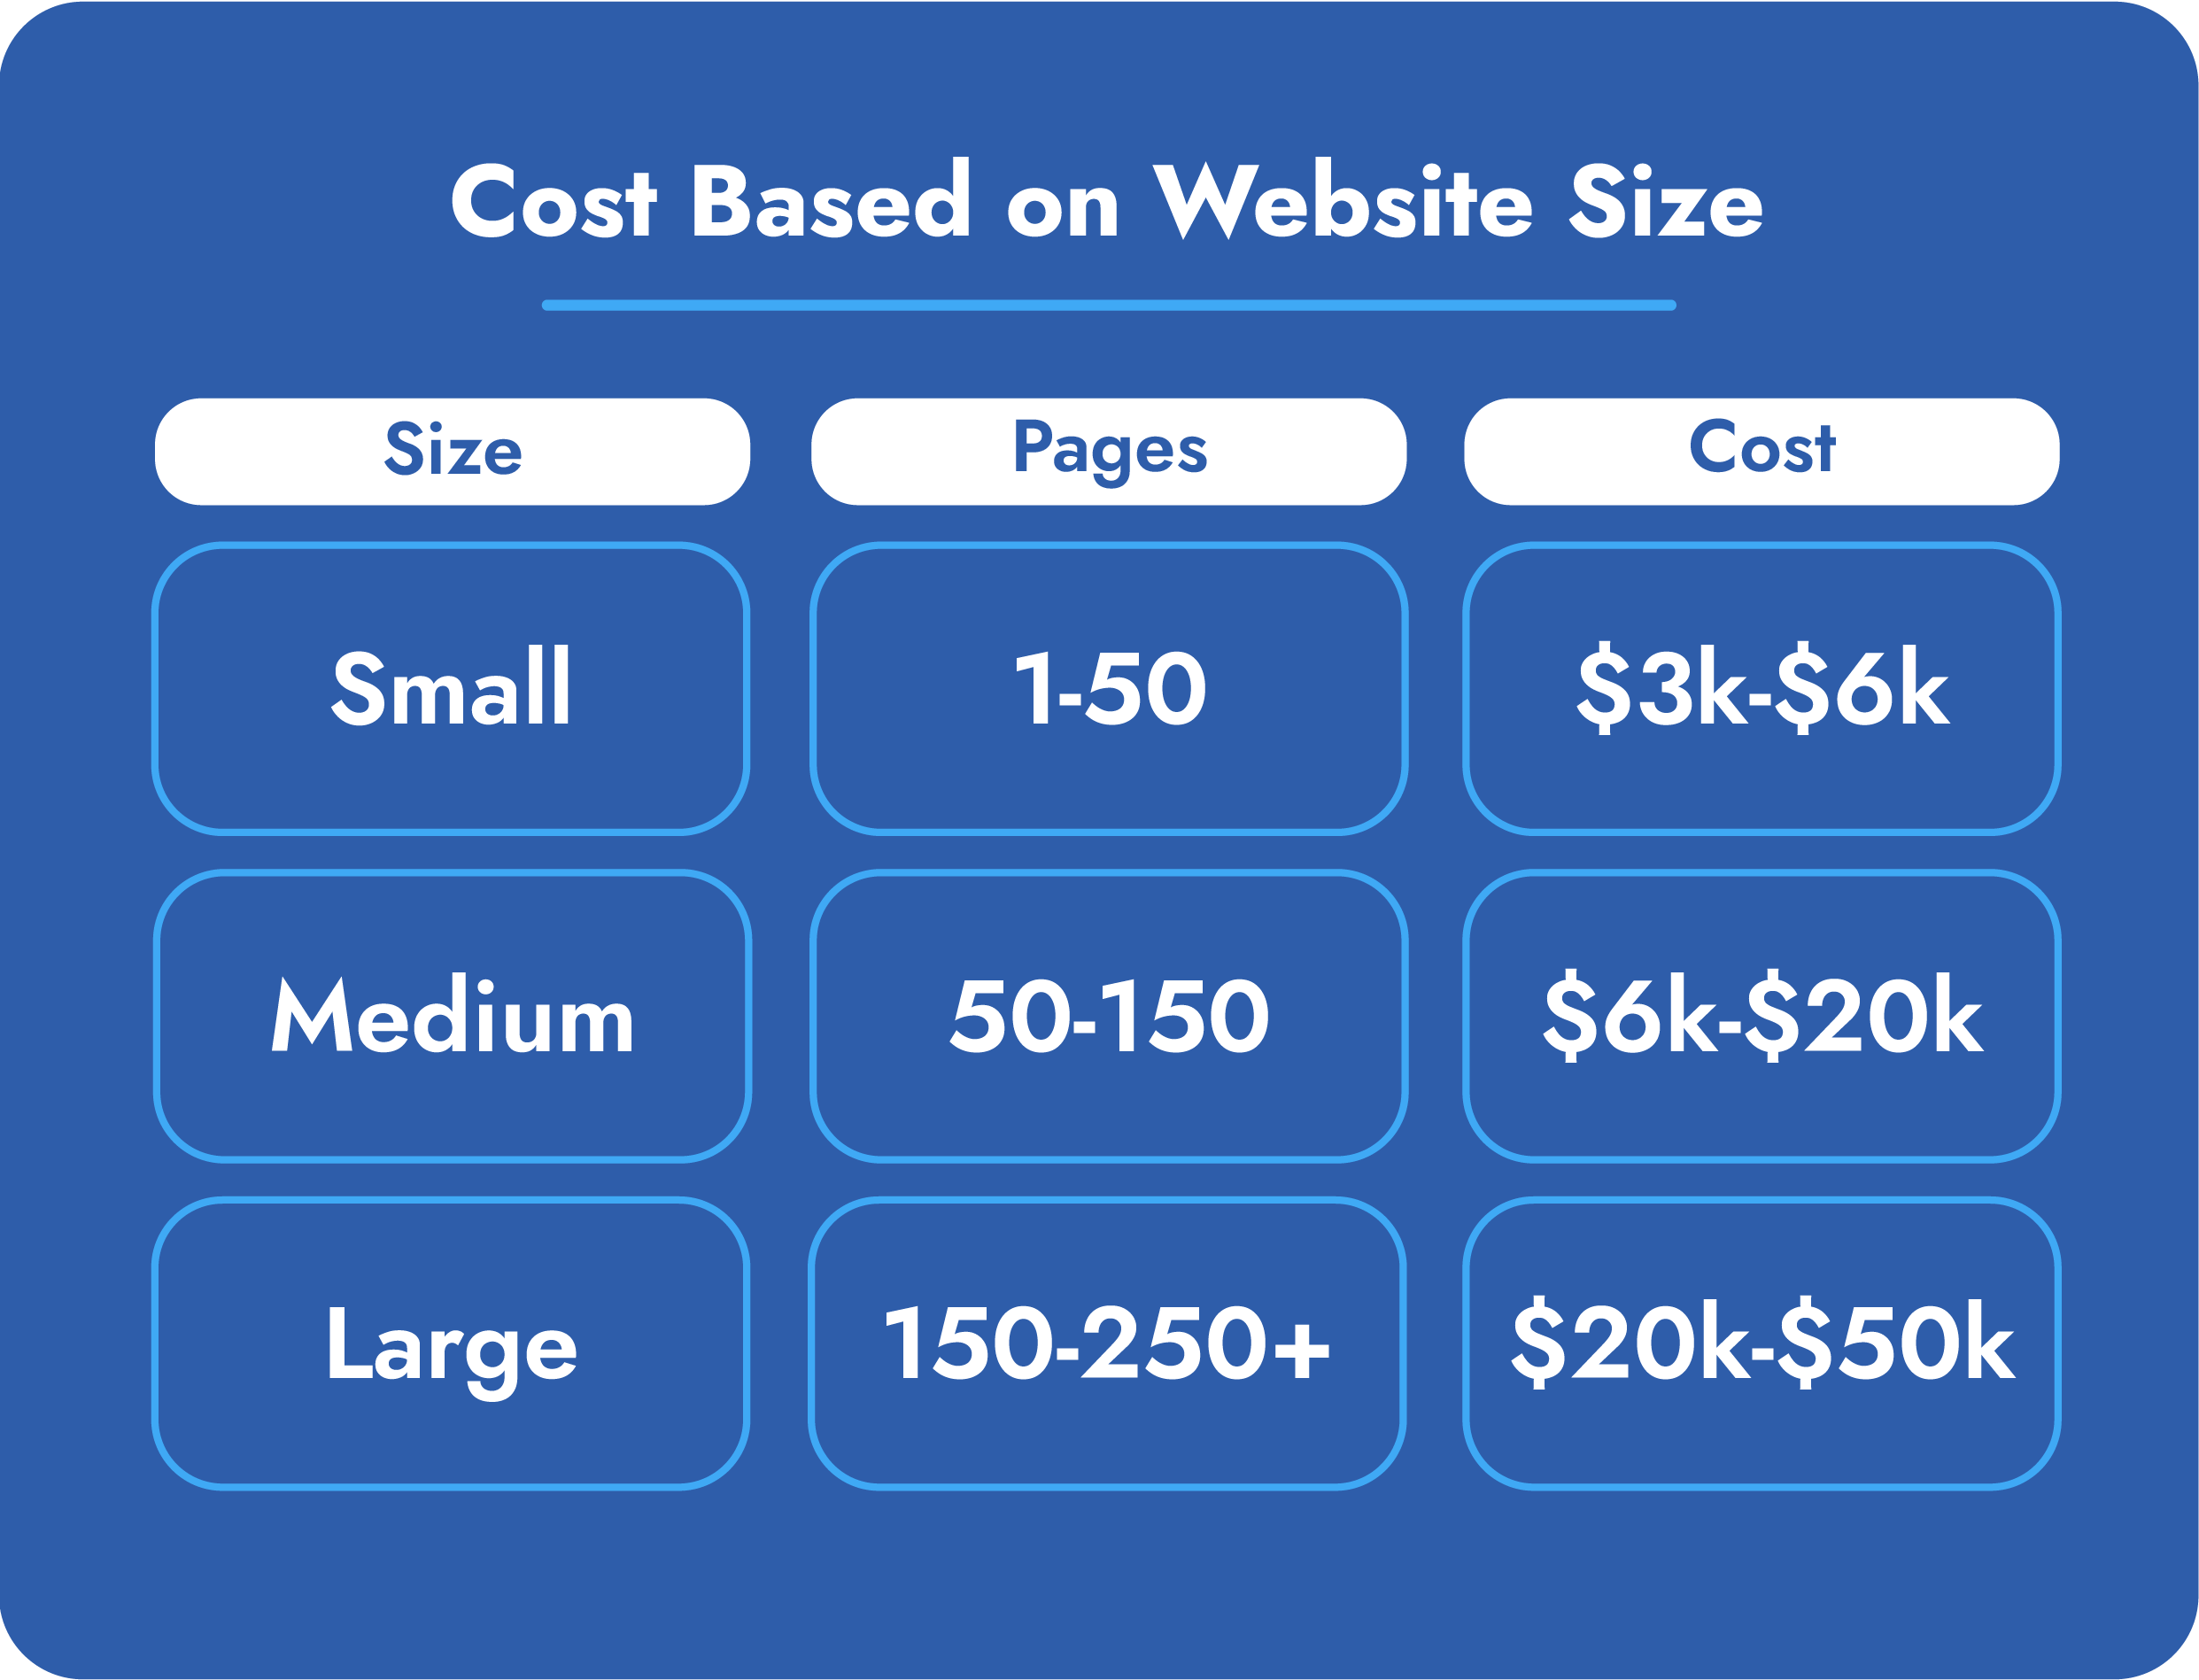 Costs of website pages on size and number of pages.